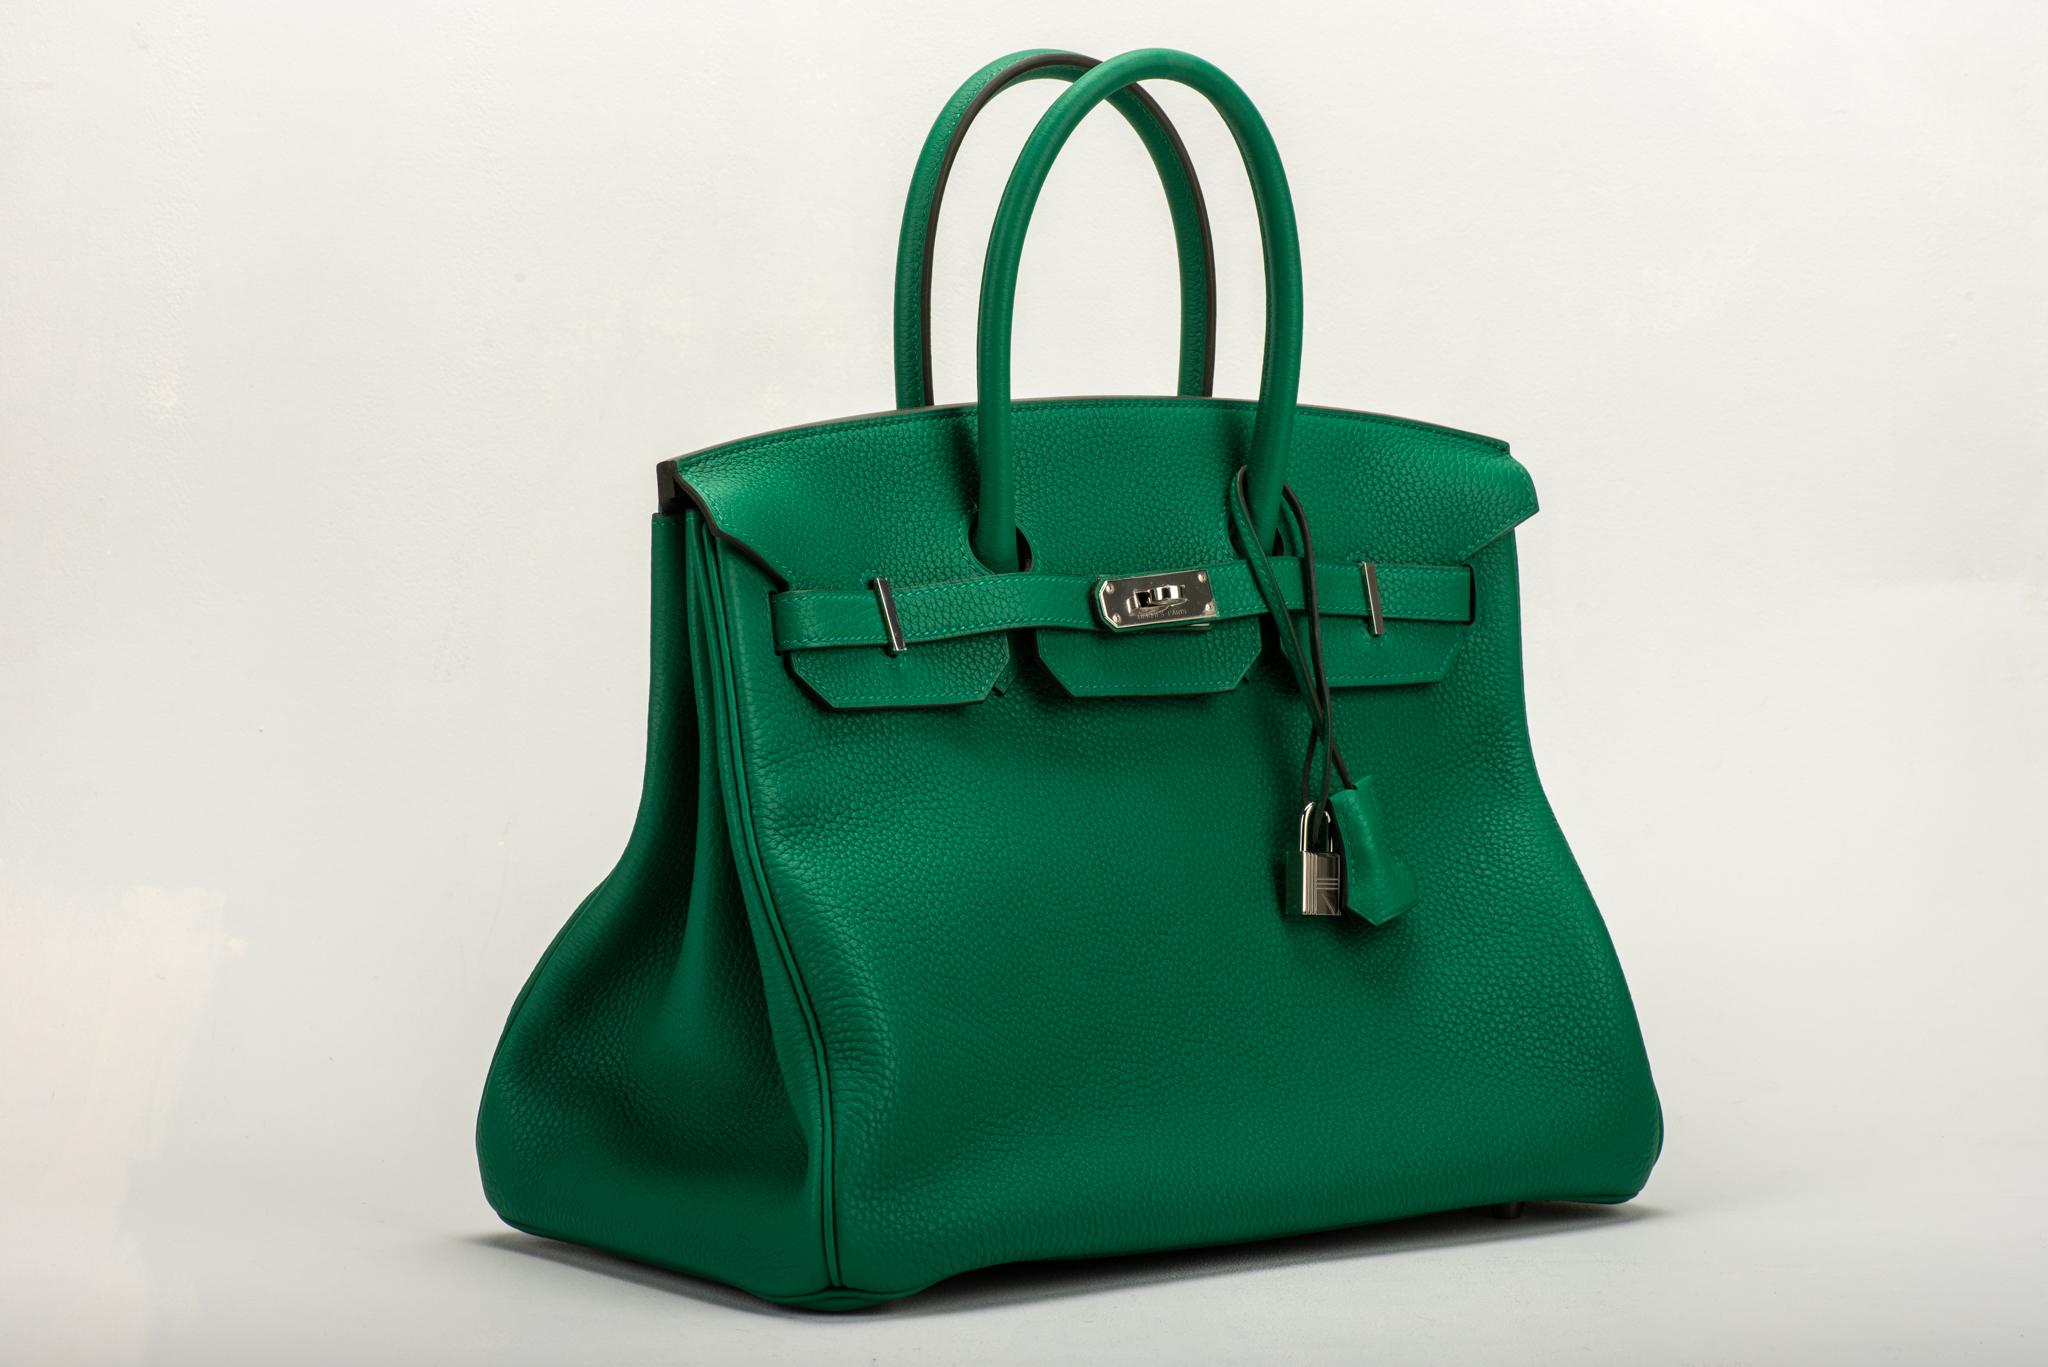 Hermes new limited edition rare and collectible birkin 35 